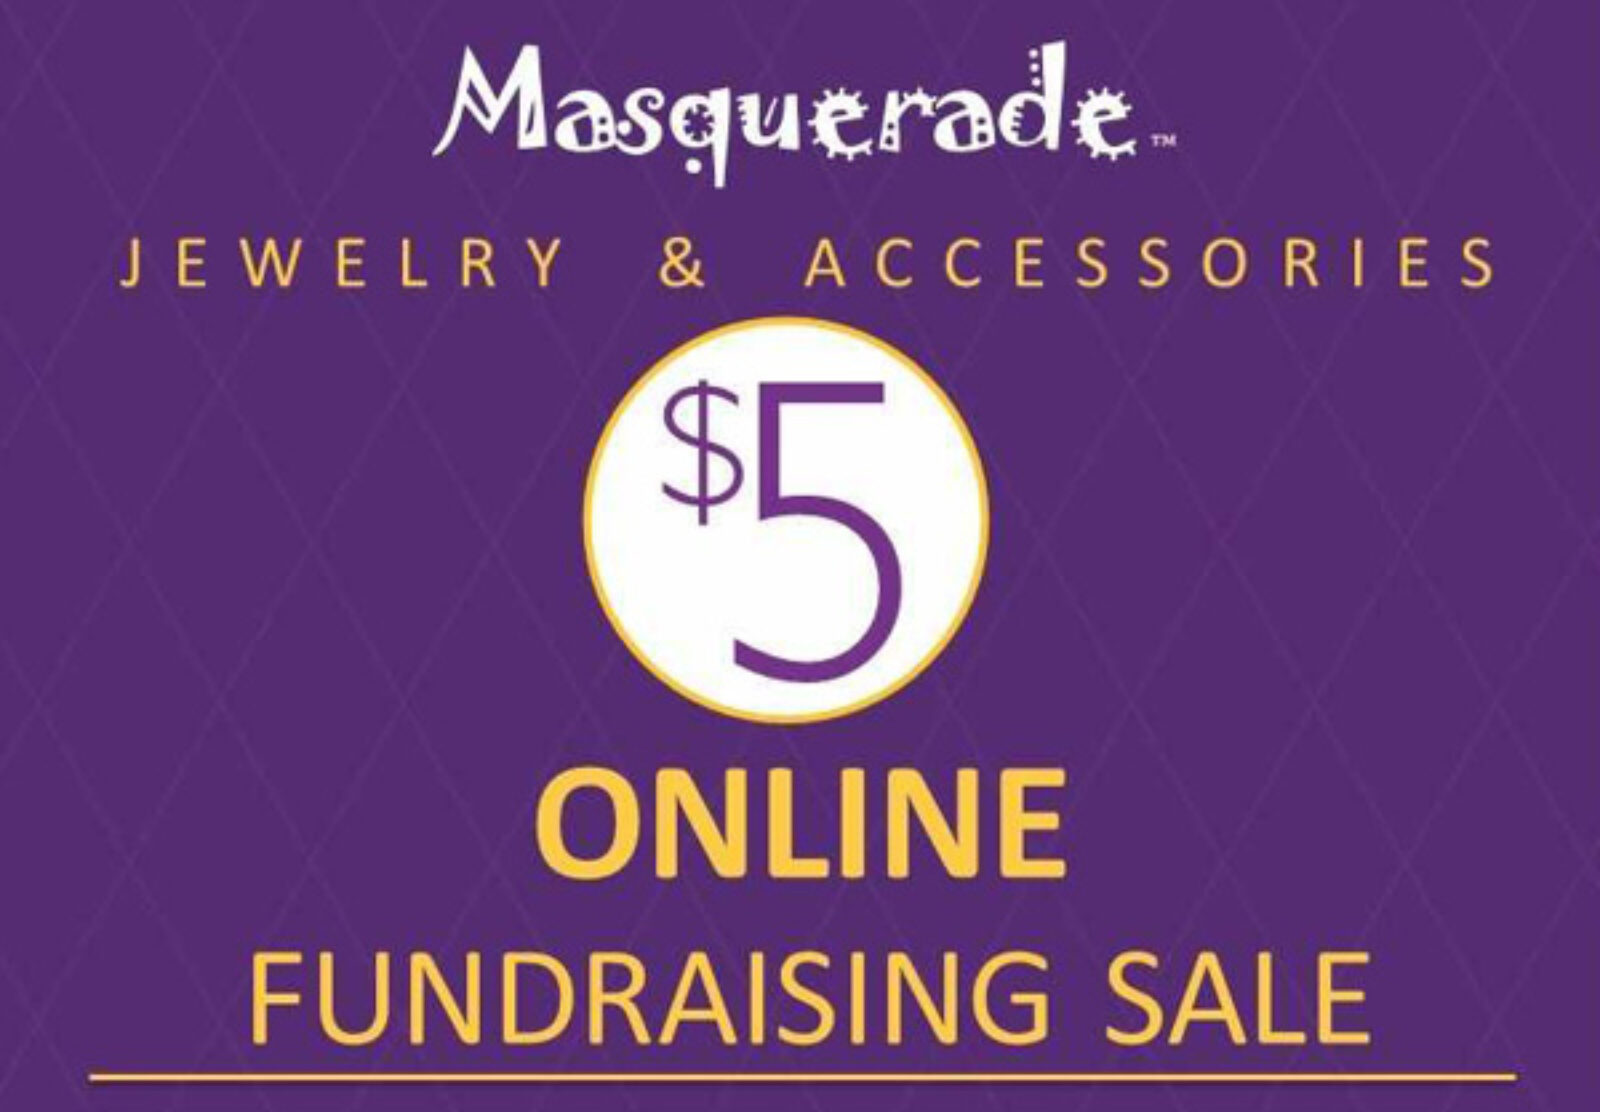 Online $5 Jewelry Sale to Benefit Patient Touches